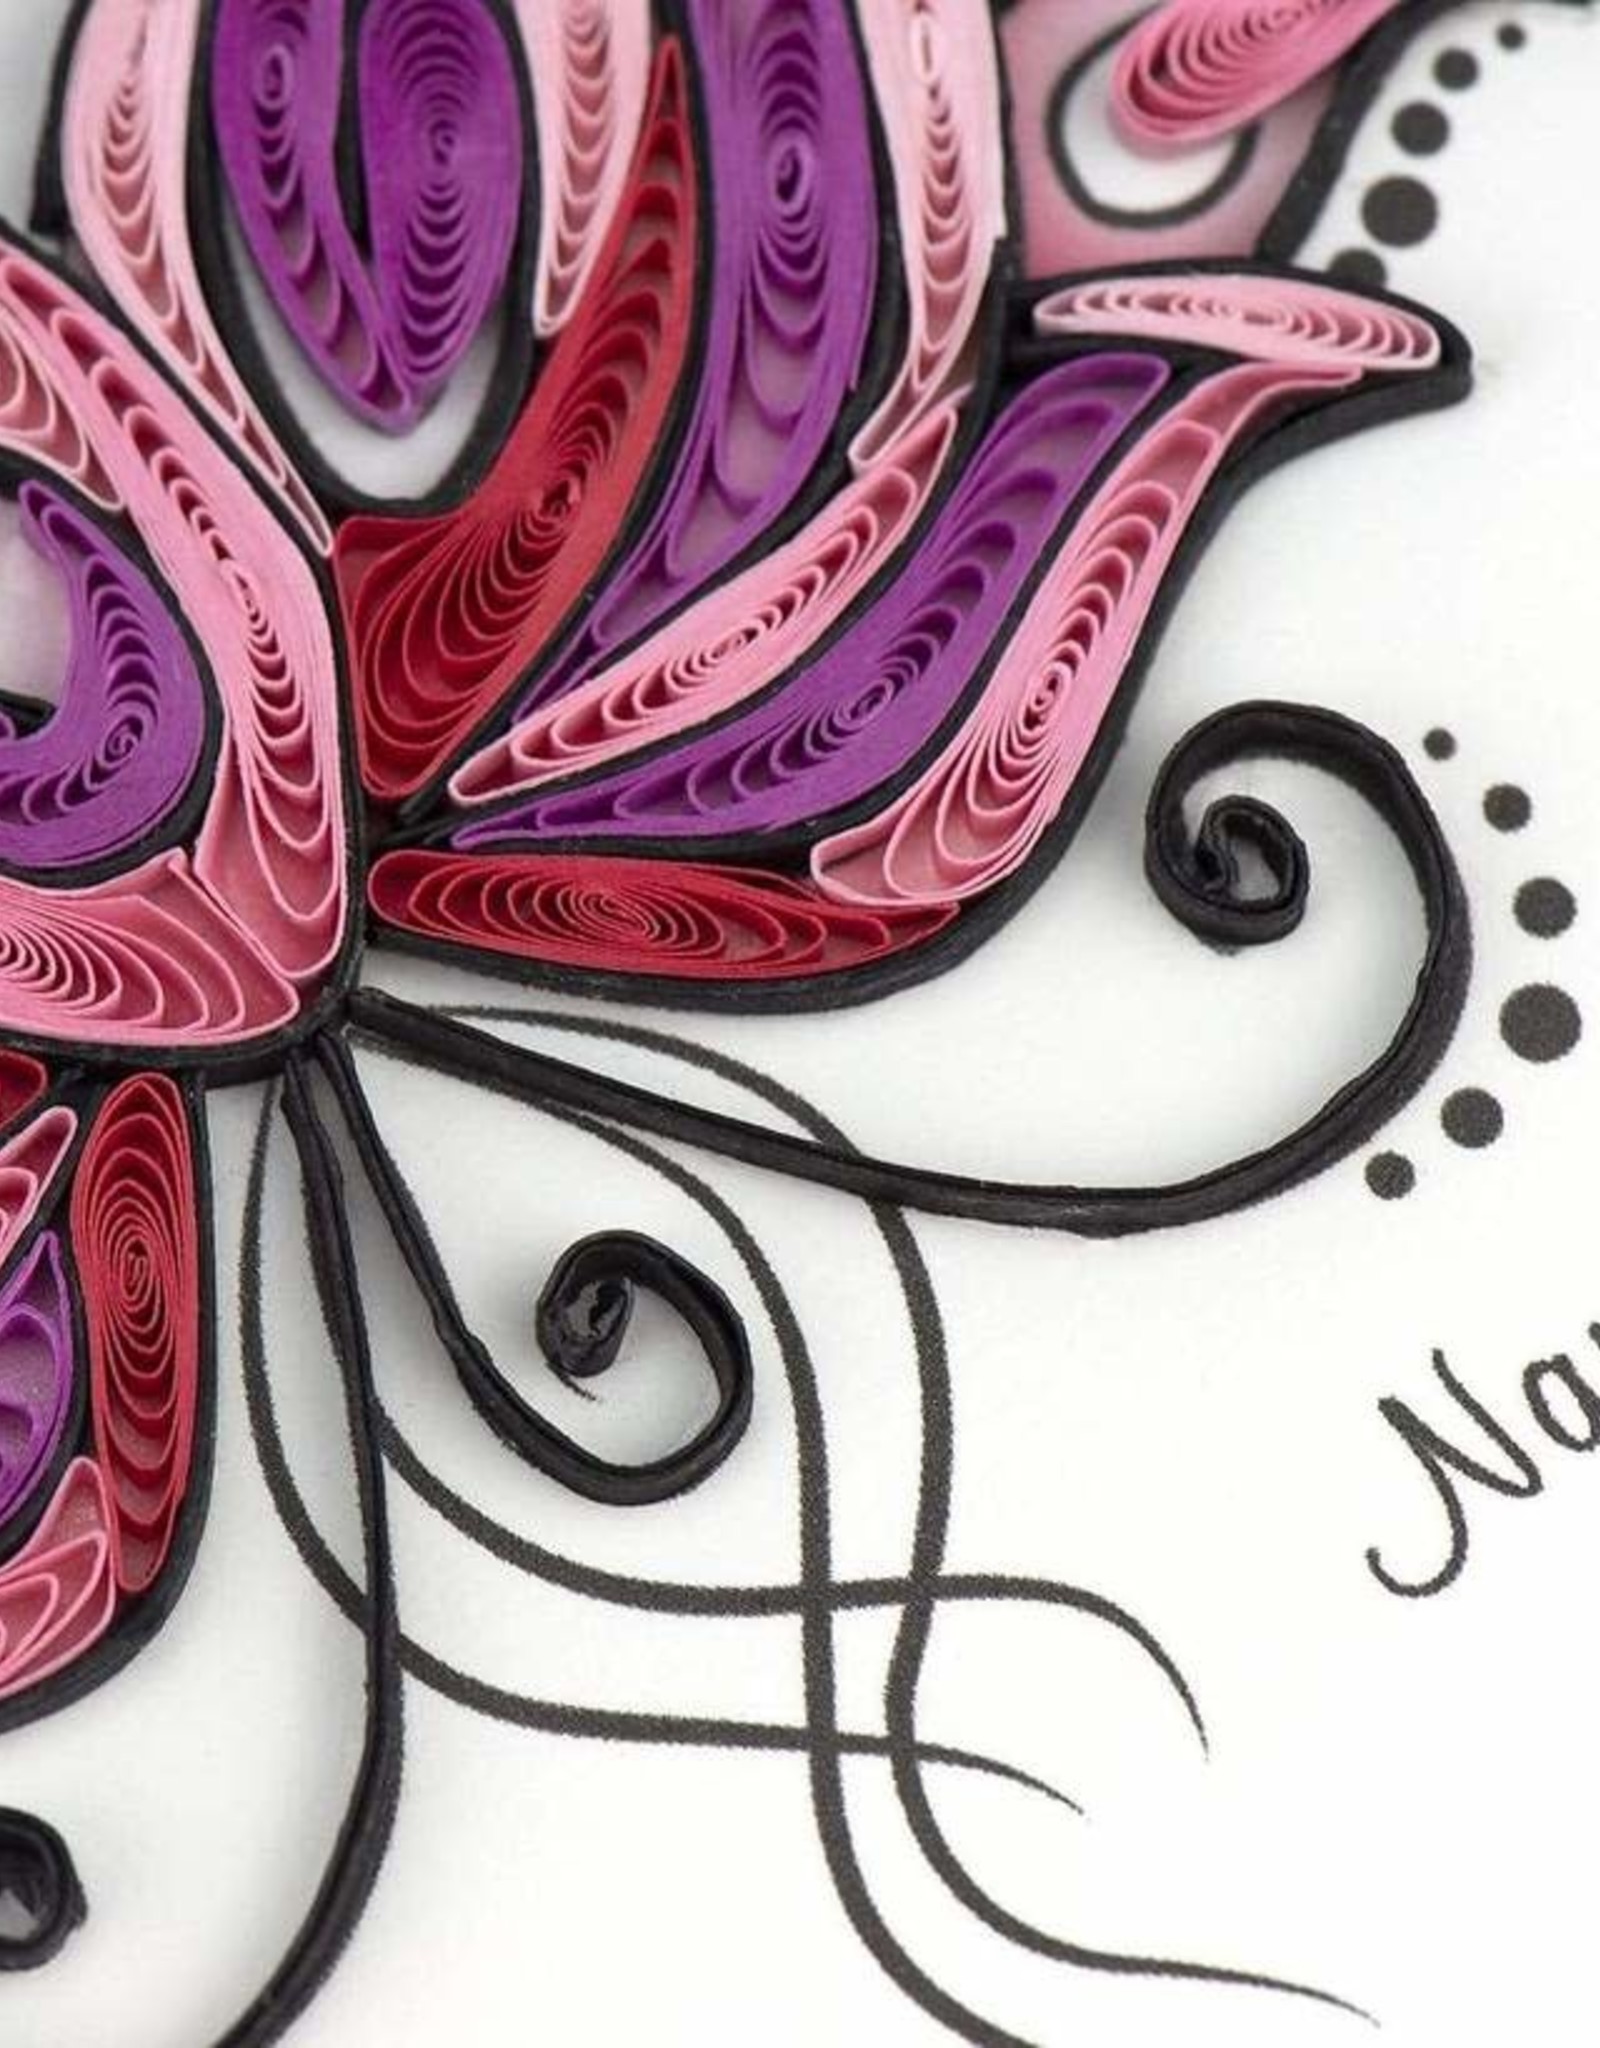 Quilling Card Quilled Namaste Greeting Card